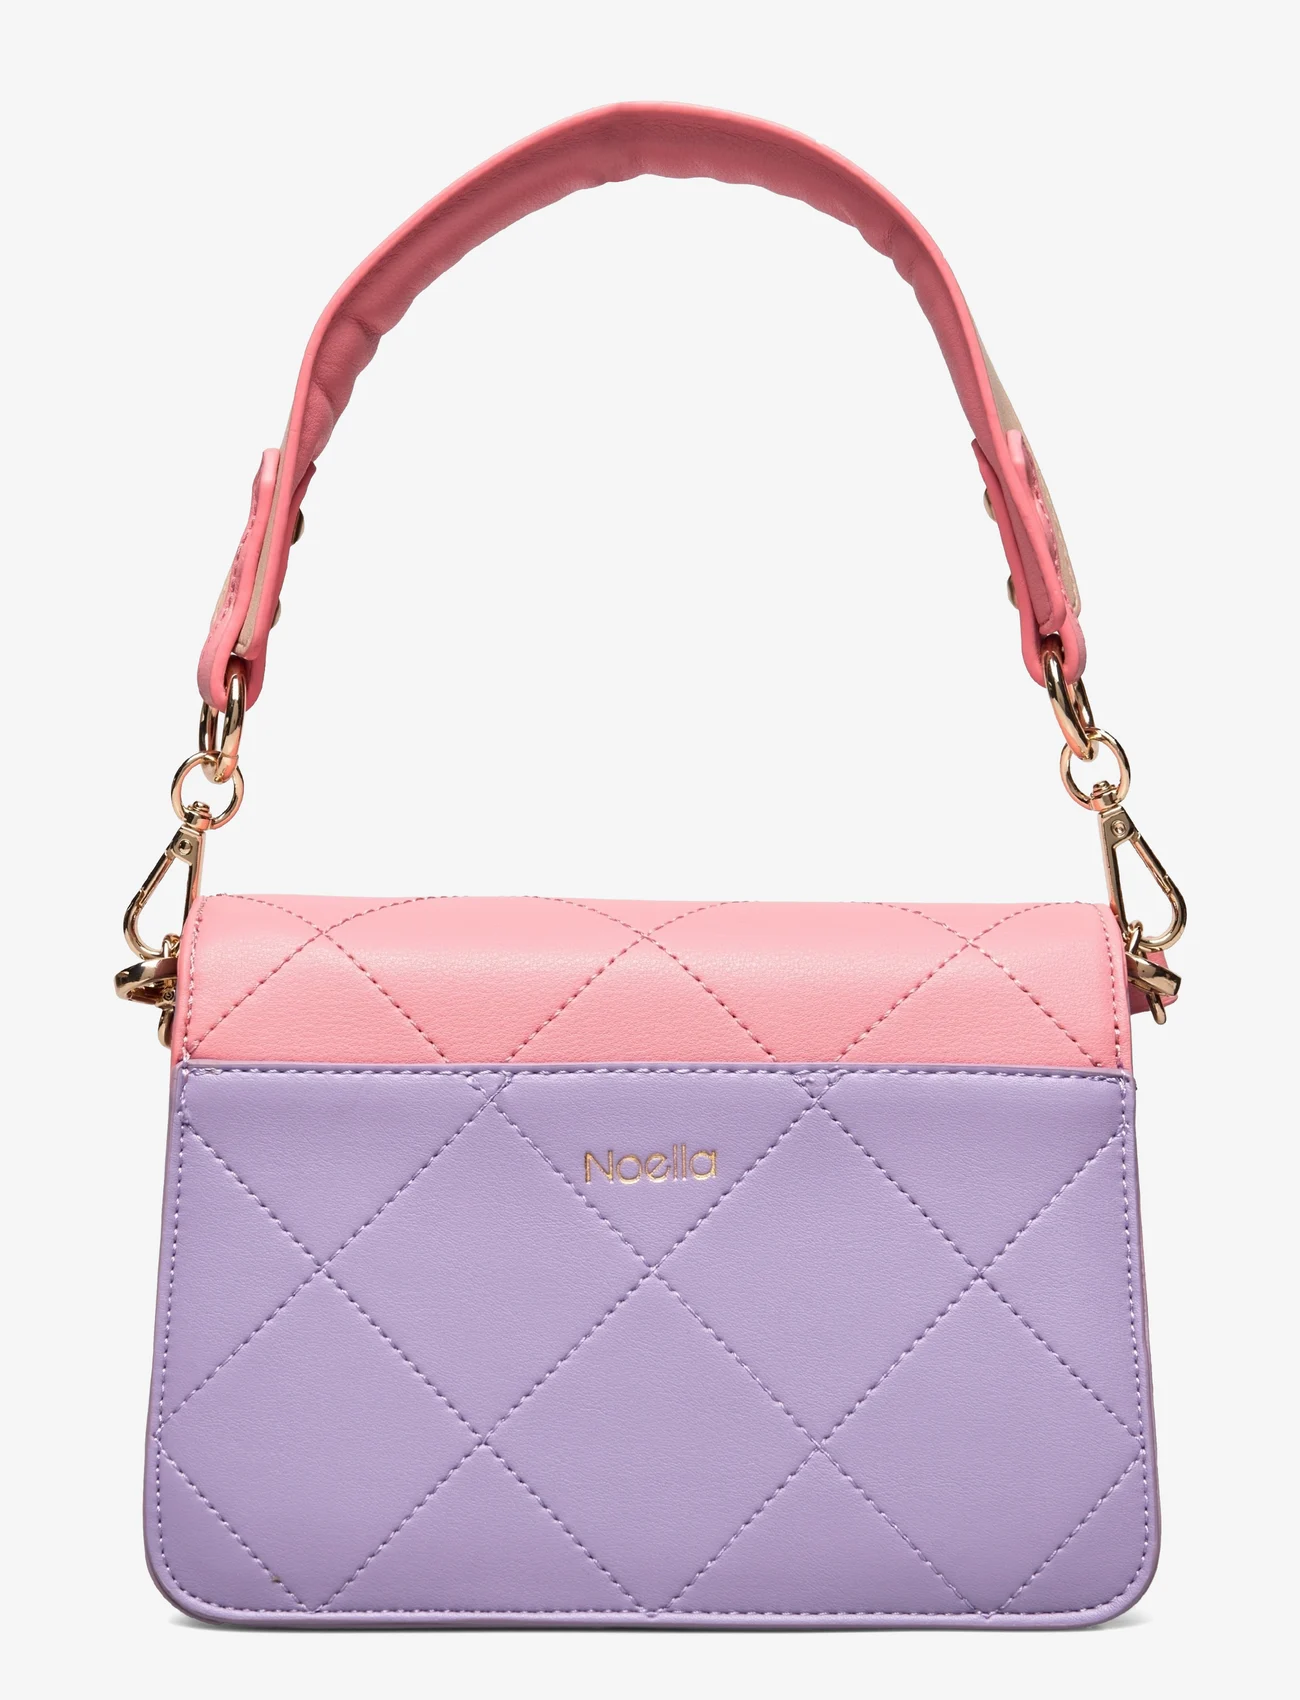 Noella - Blanca Bag Medium - party wear at outlet prices - coral/purple/nude - 1